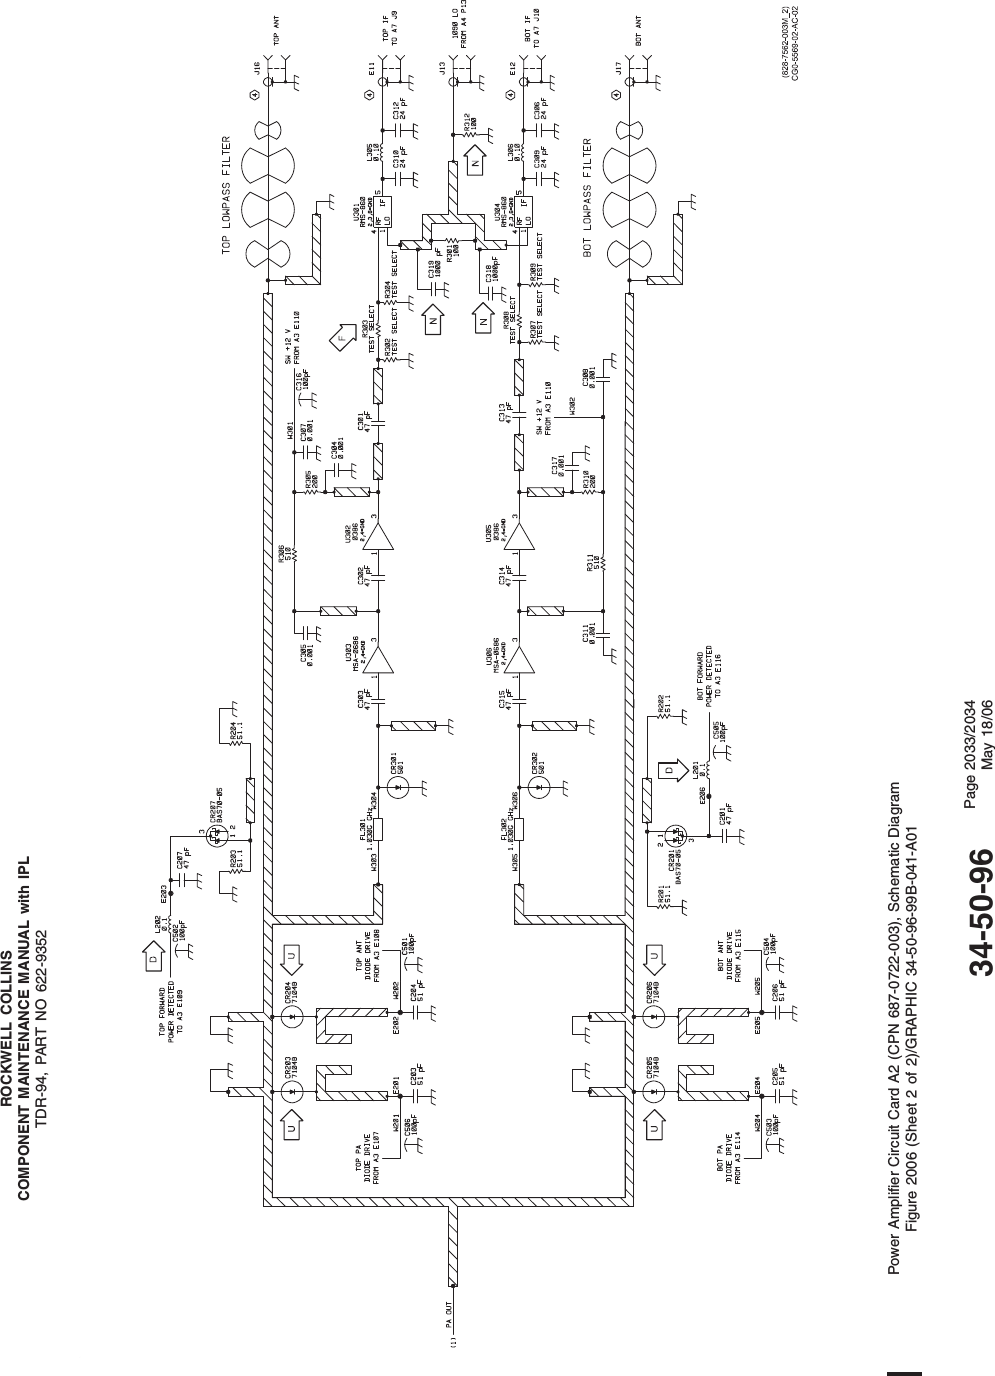 ROCKWELL COLLINSCOMPONENT MAINTENANCE MANUAL with IPLTDR-94, PART NO 622-9352Power Amplifier Circuit Card A2 (CPN 687-0722-003), Schematic DiagramFigure 2006 (Sheet 2 of 2)/GRAPHIC 34-50-96-99B-041-A0134-50-96 Page 2033/2034May 18/06